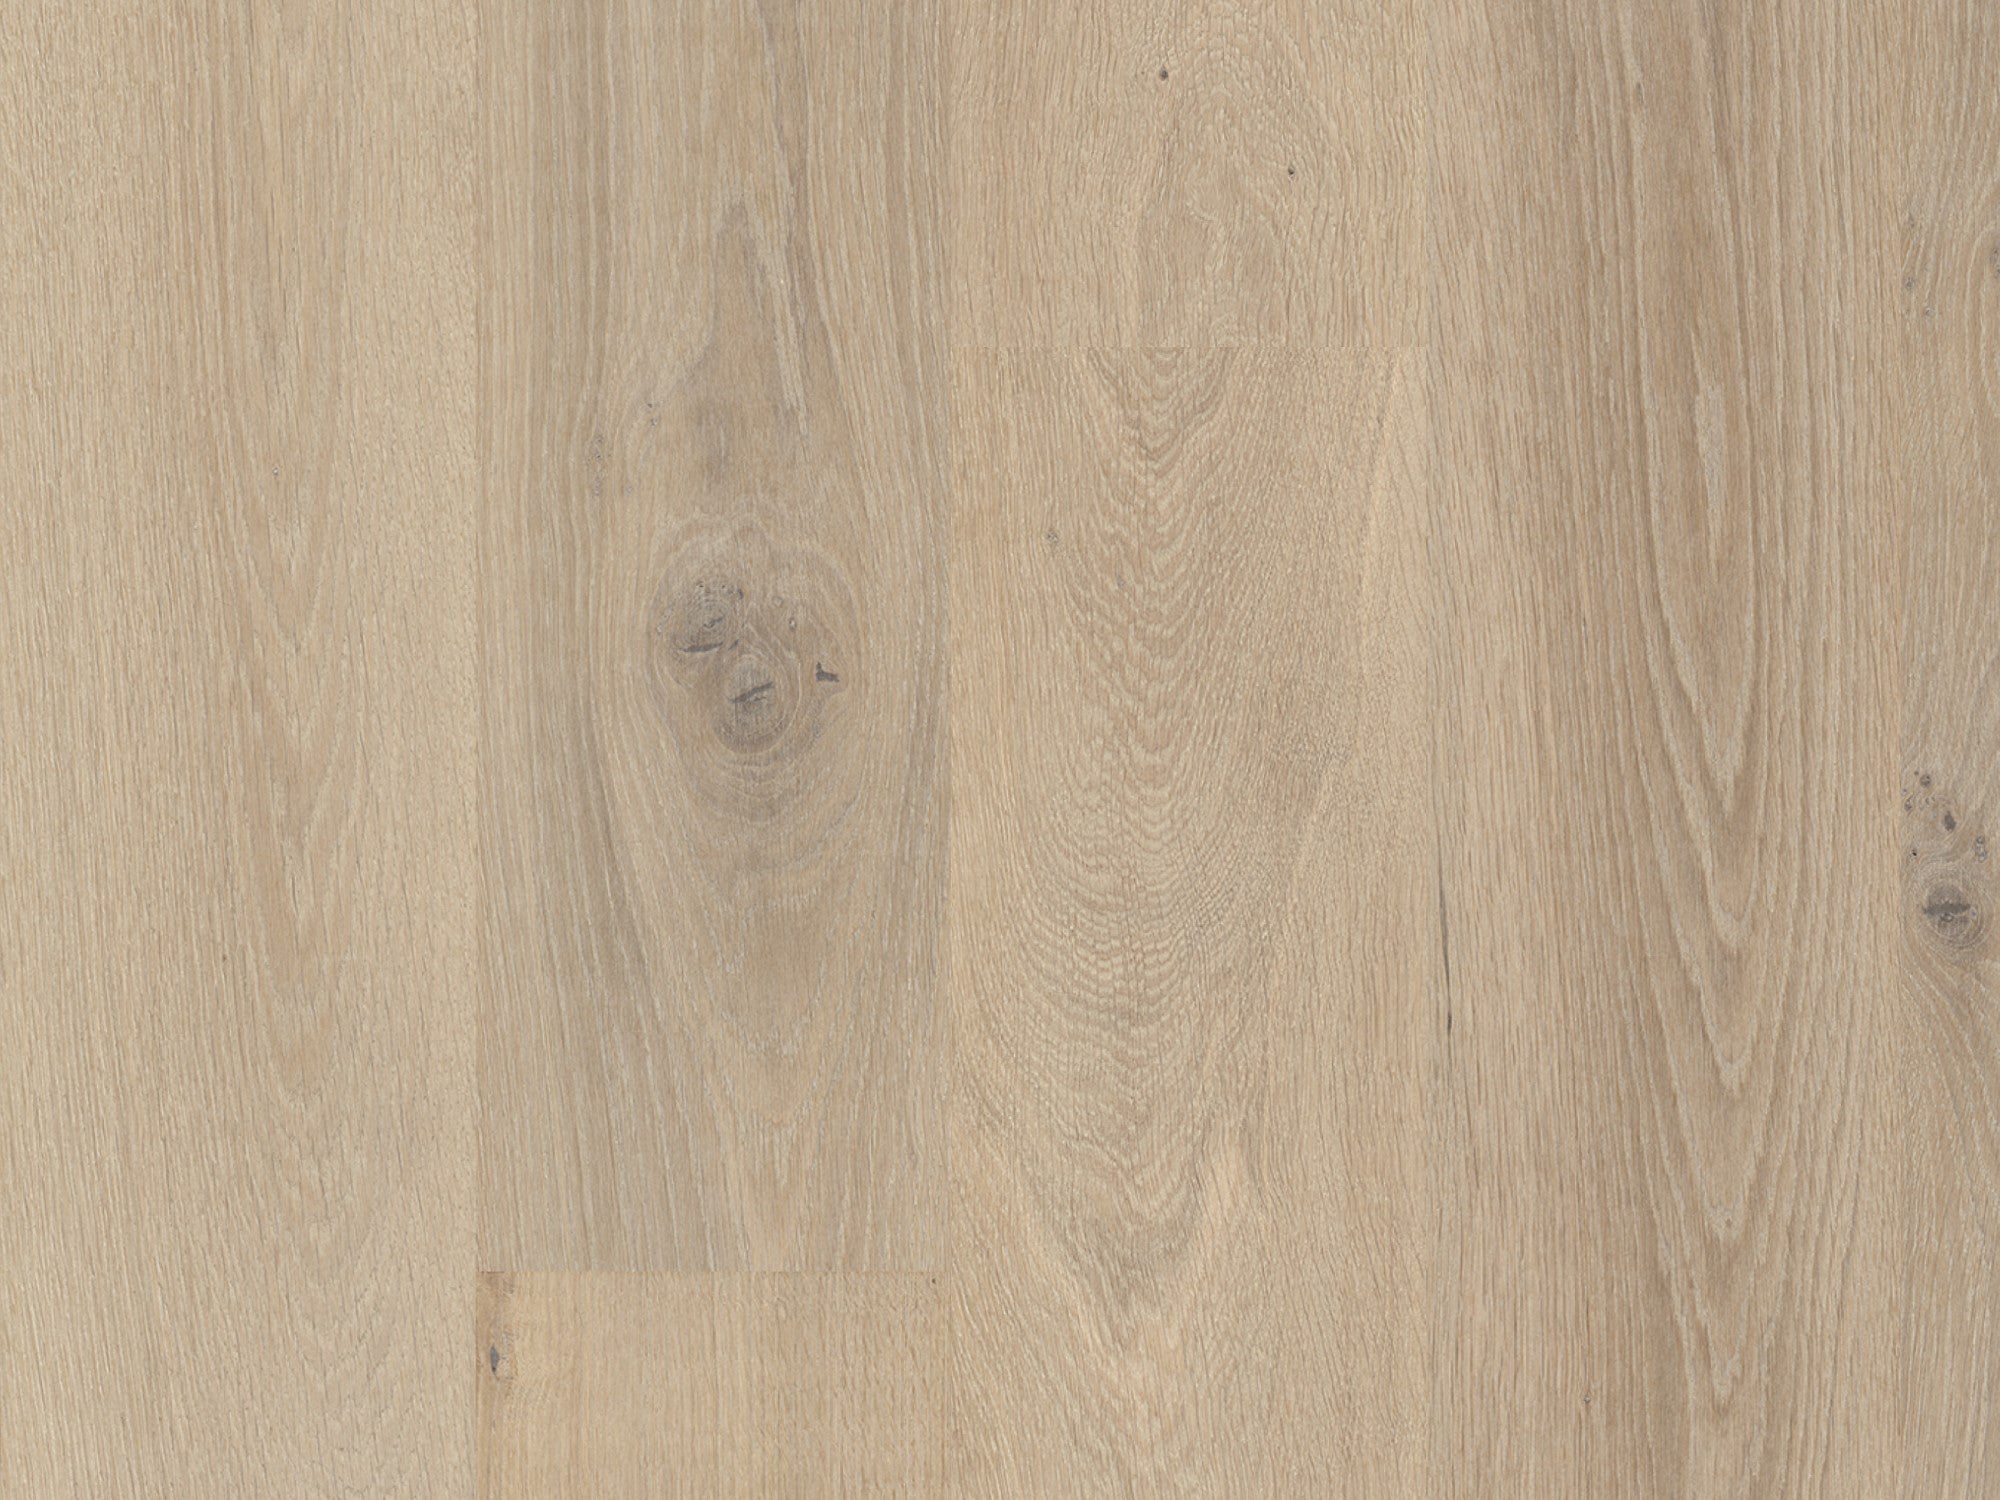 duchateau signature terra taiga european oak engineered hardnatural wood floor uv lacquer finish for interior use distributed by surface group international